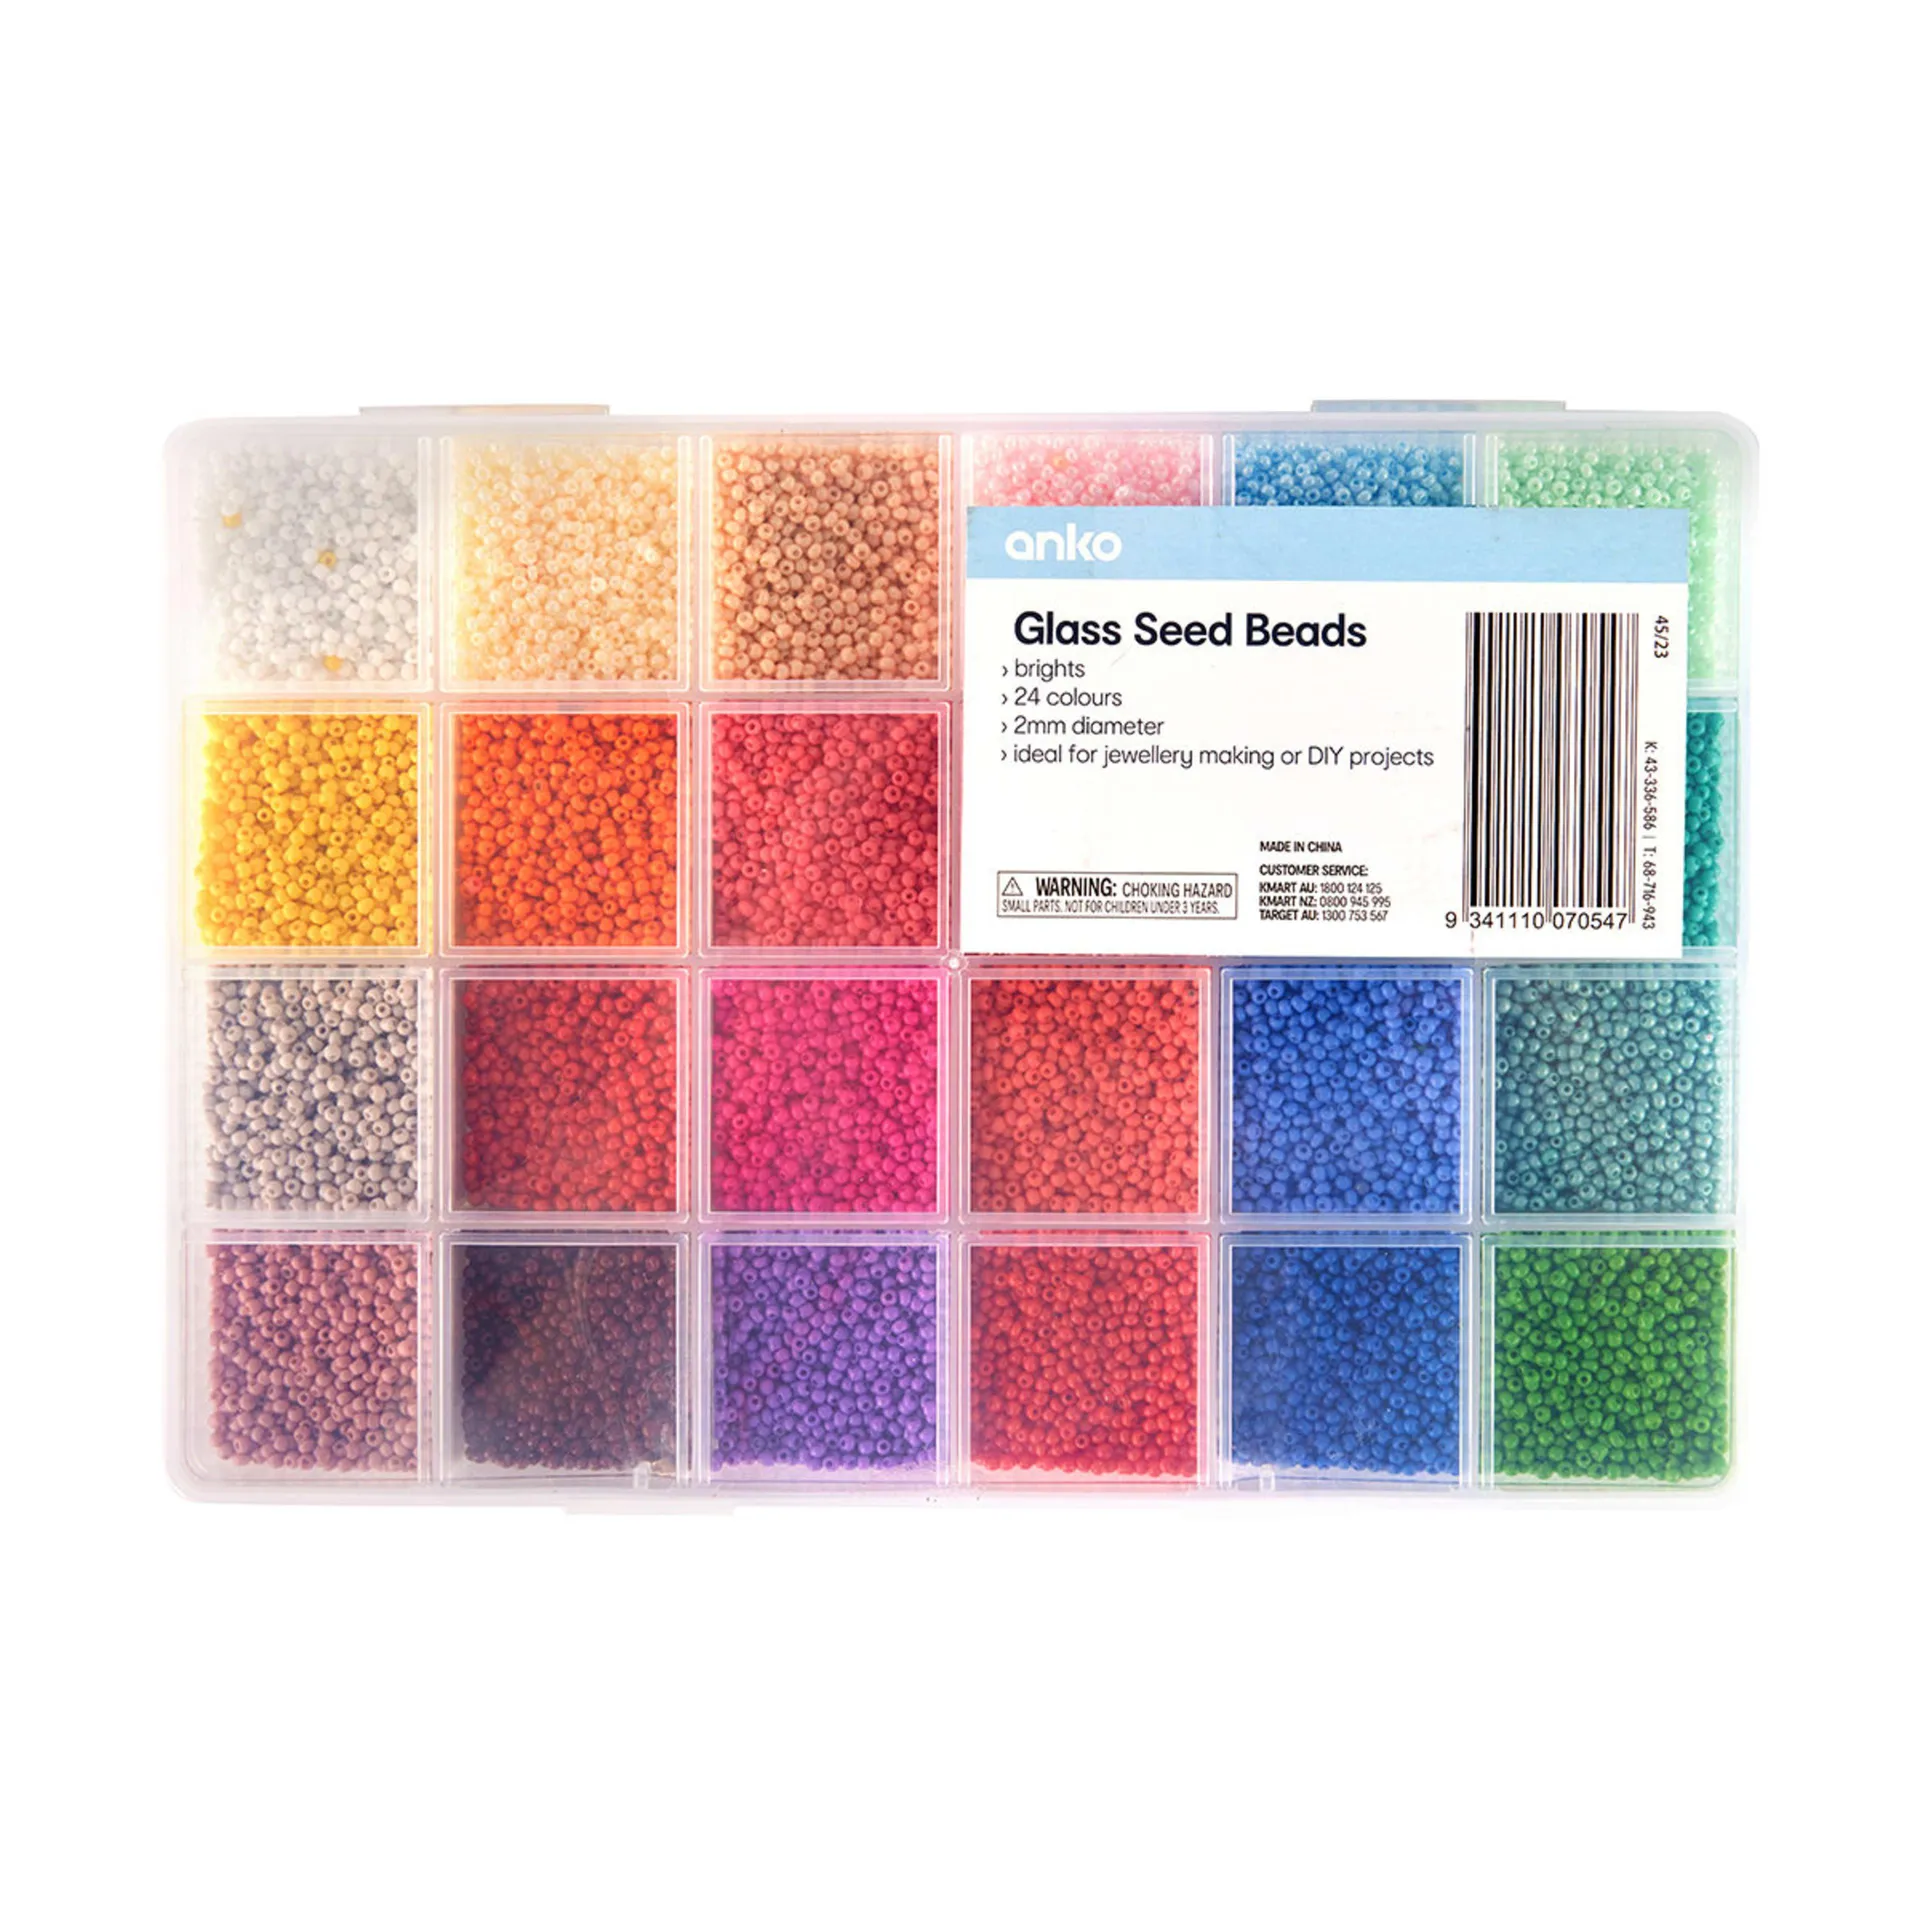 Glass Seed Beads - Brights